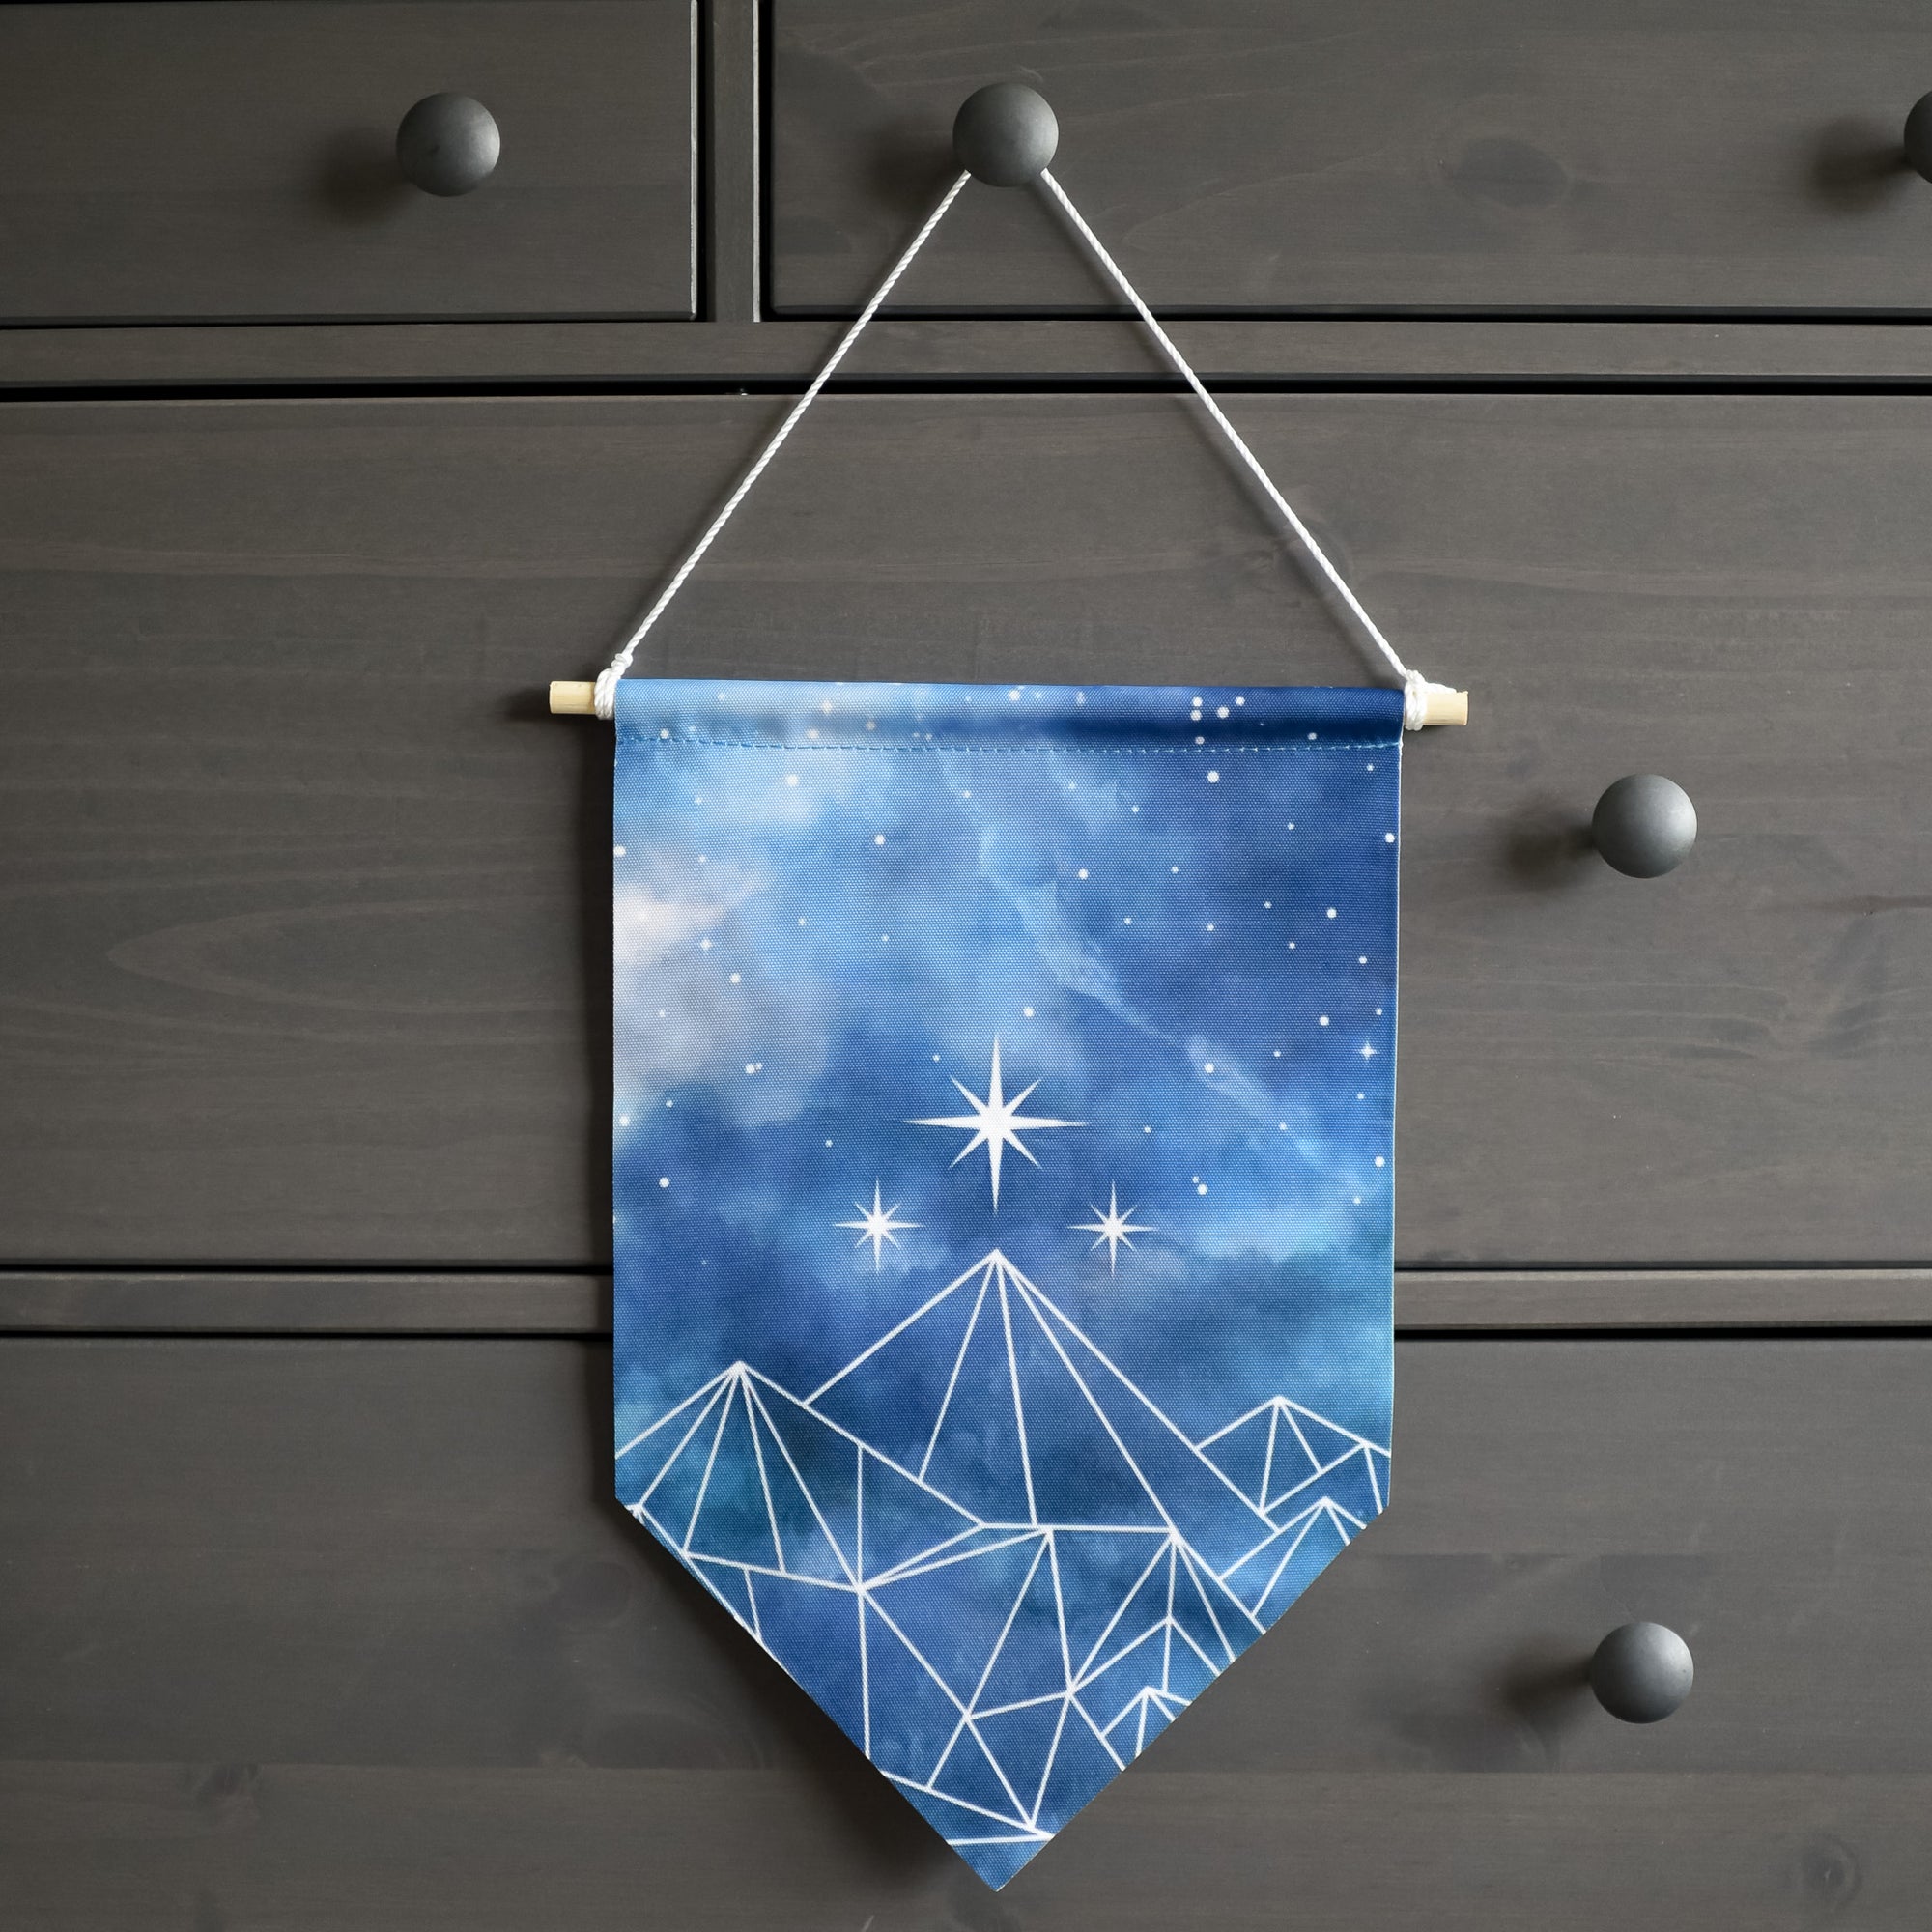 ACOTAR Velaris Pin Banner hanging with wood dowel & rope. Blue night sky fabric with mountains of geometric white lines.